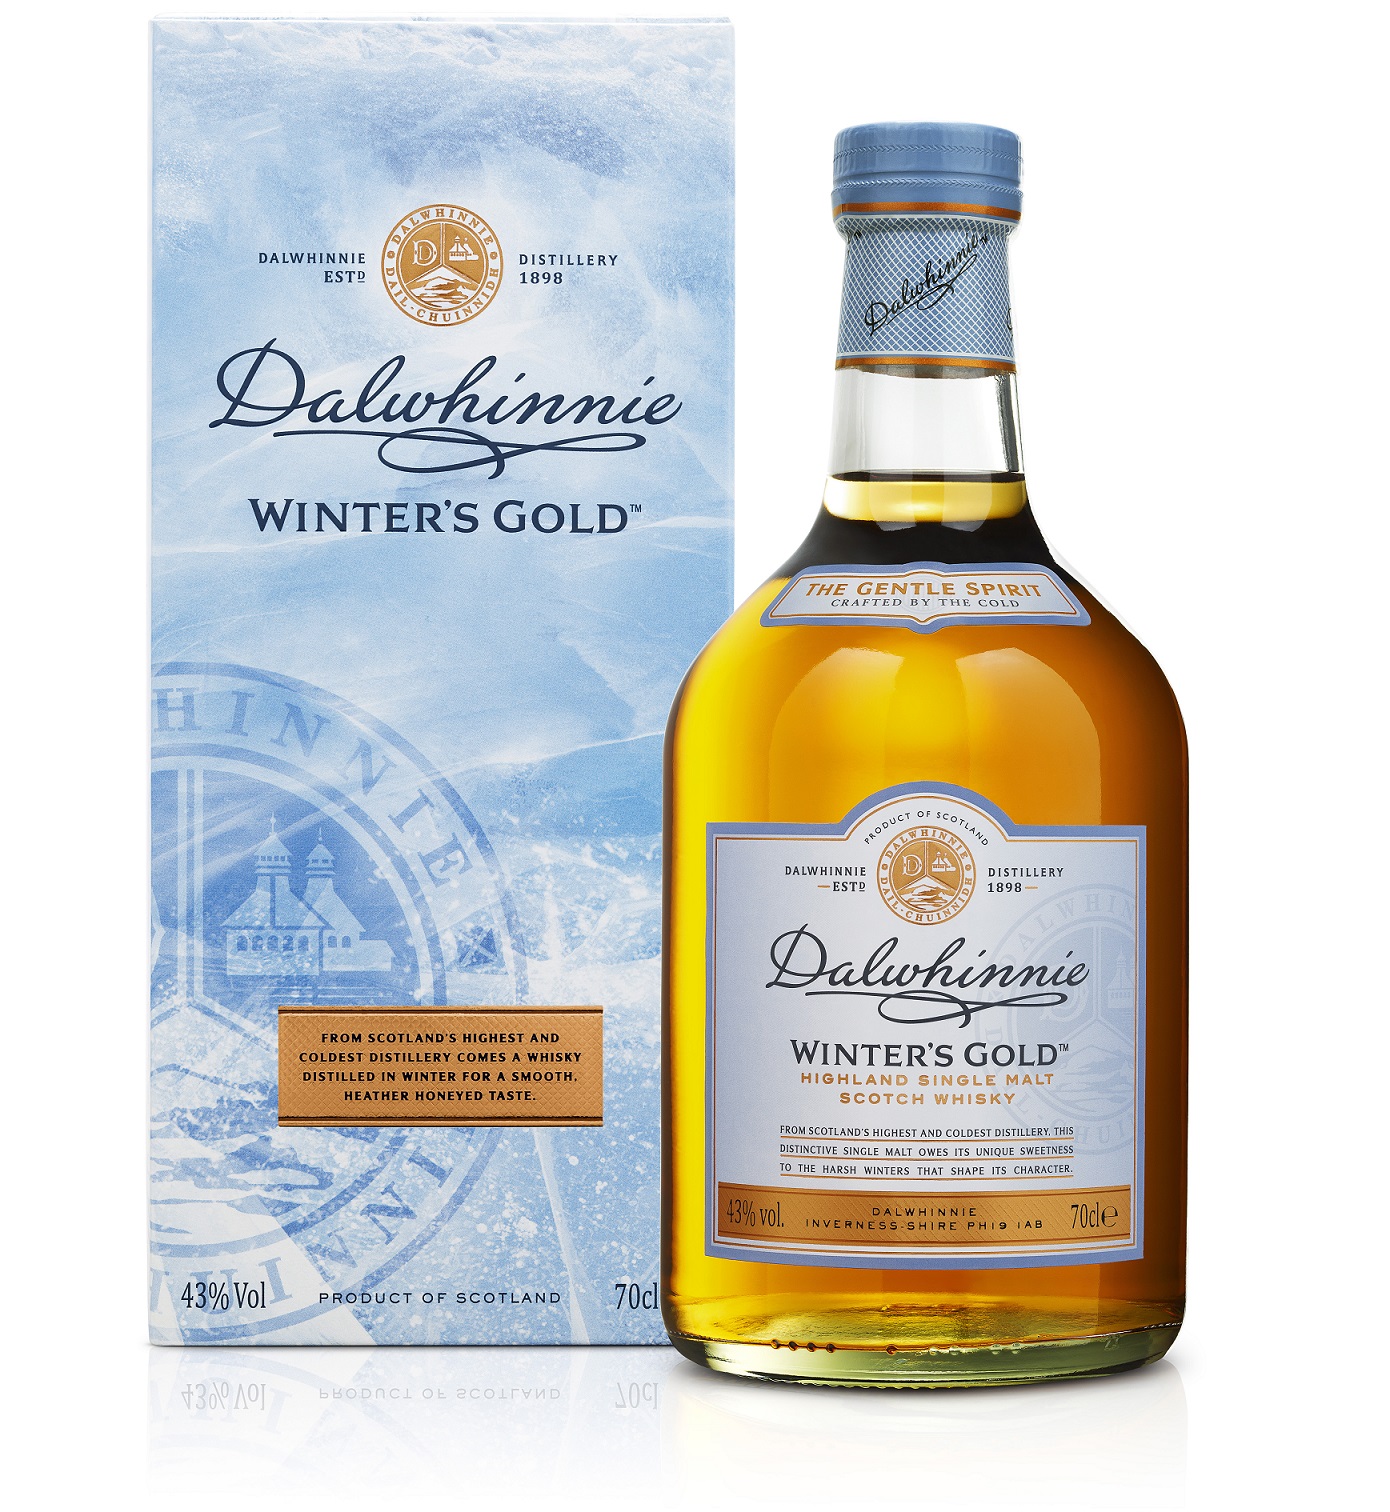 Dalwhinnie Winters Gold Whisky